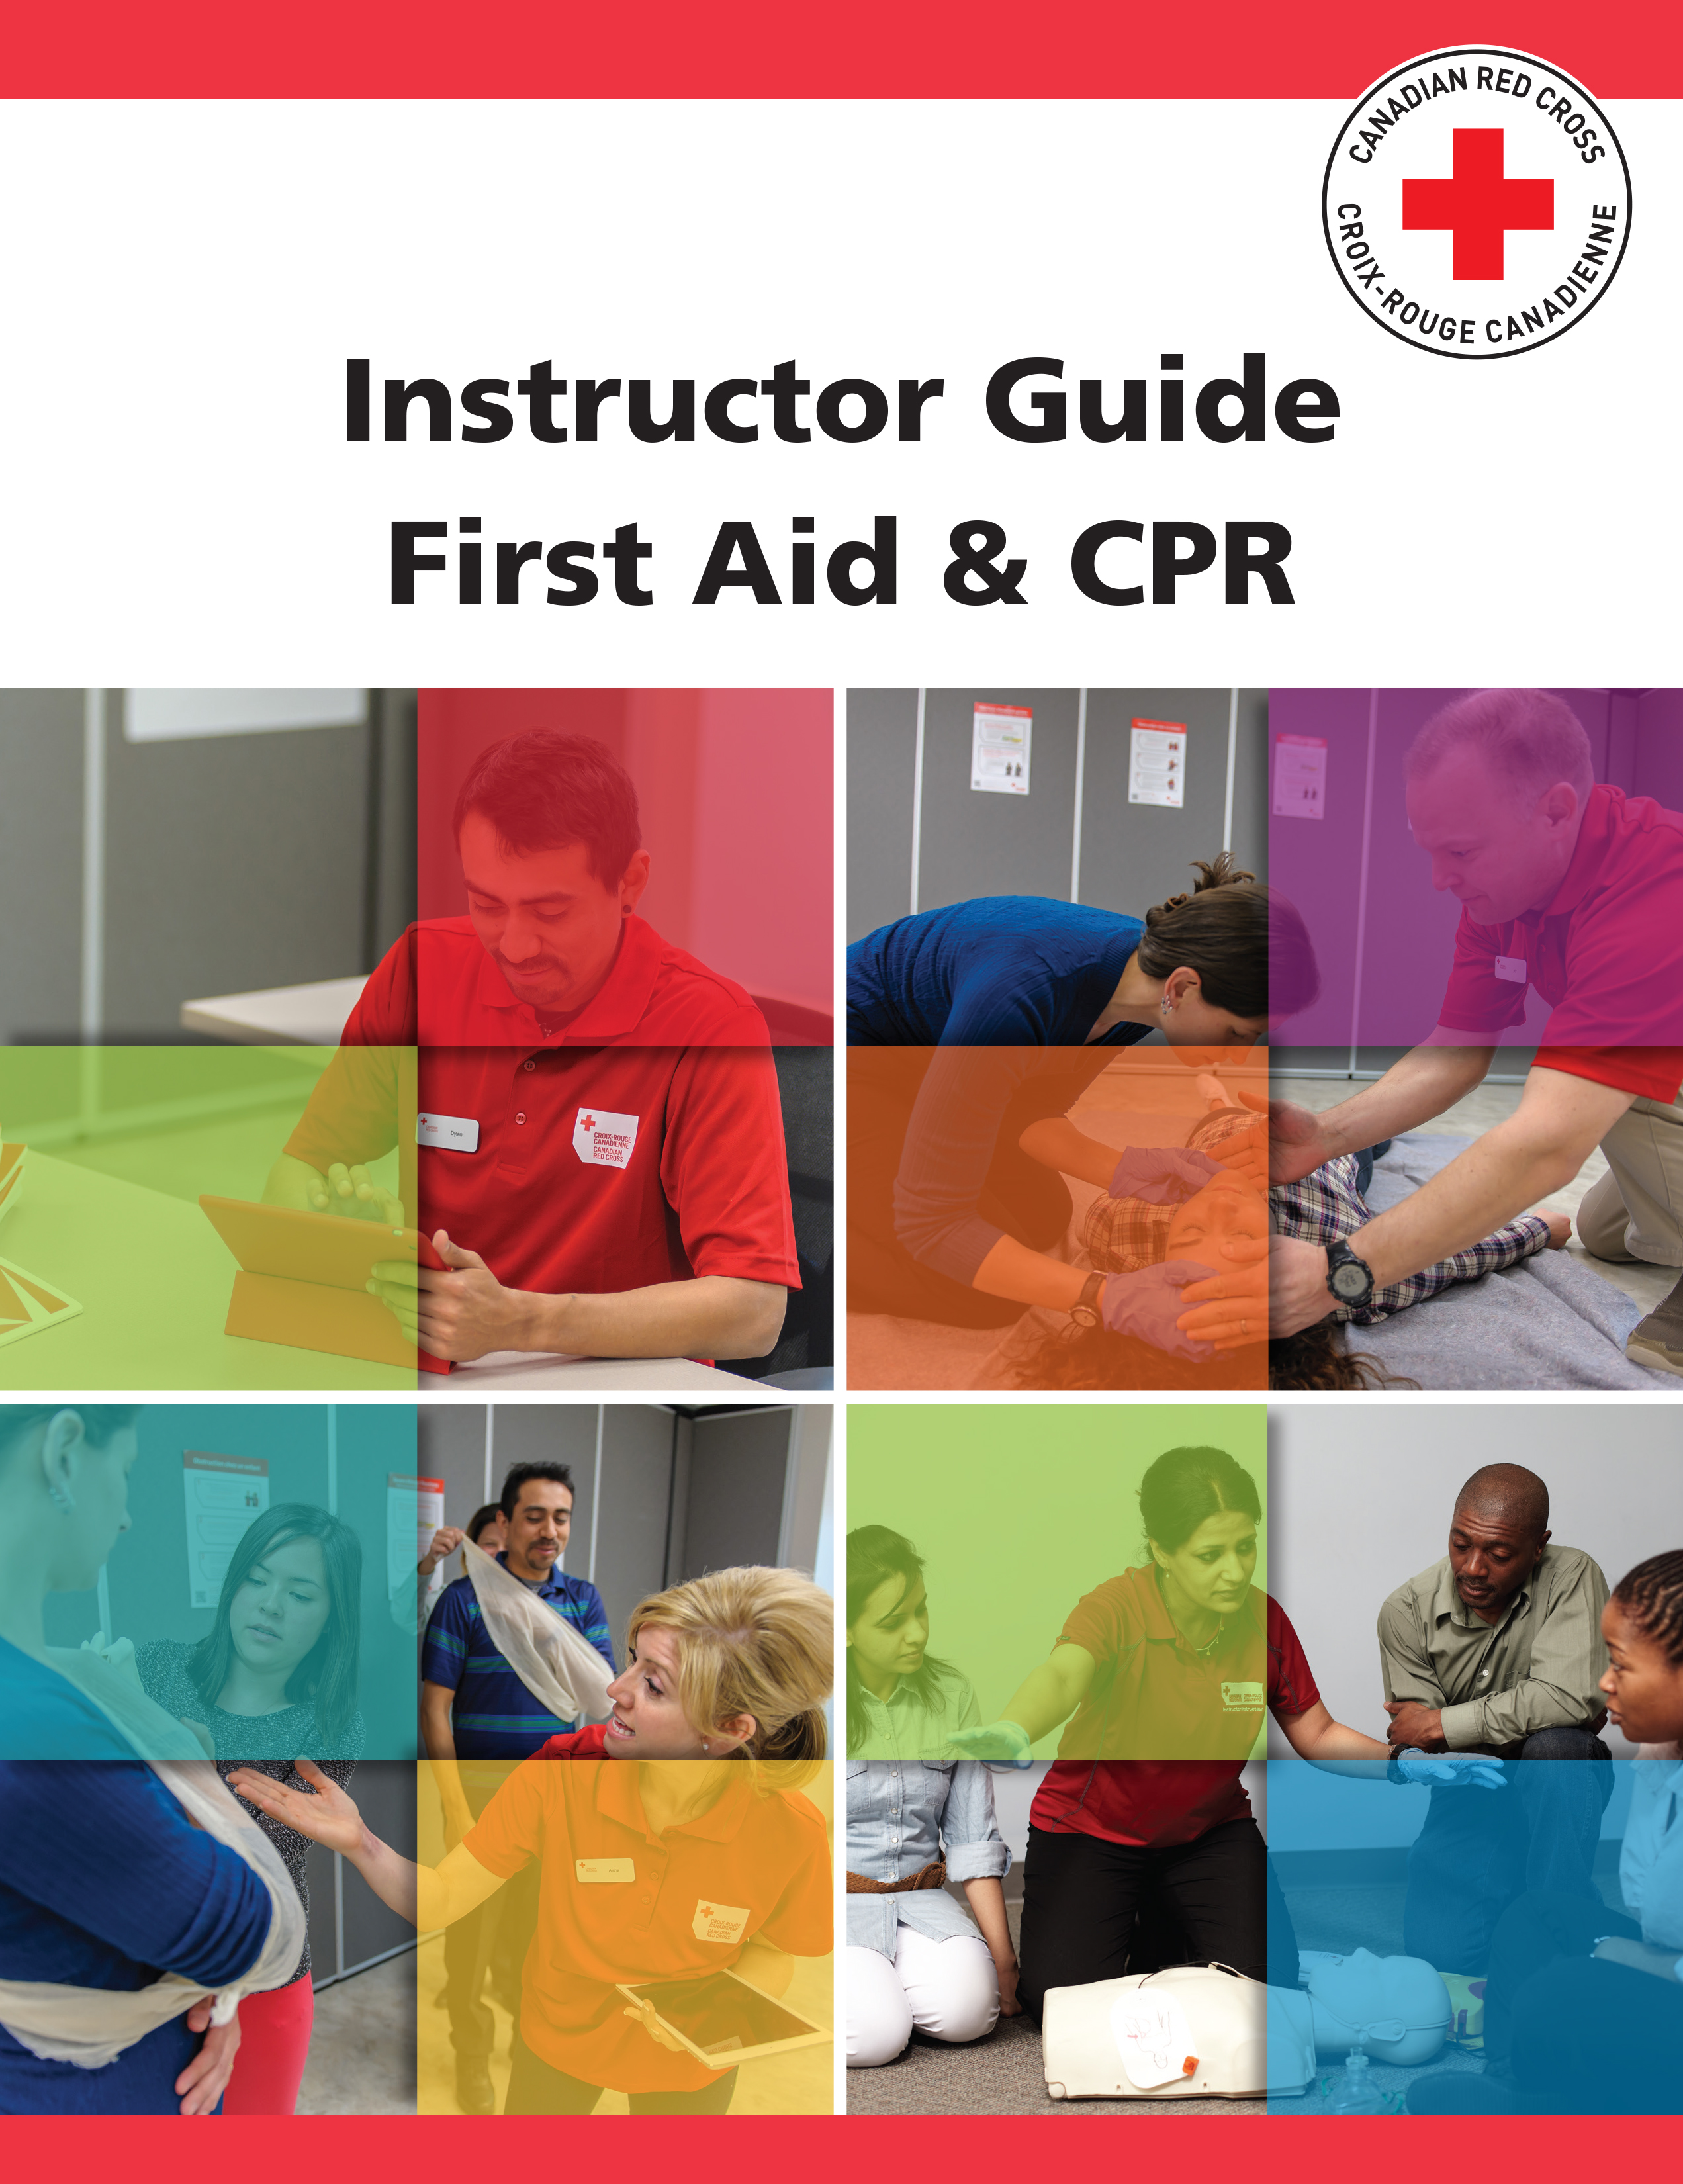 First Aid Course Materials for First Aid & CPR Instructor in Victoria